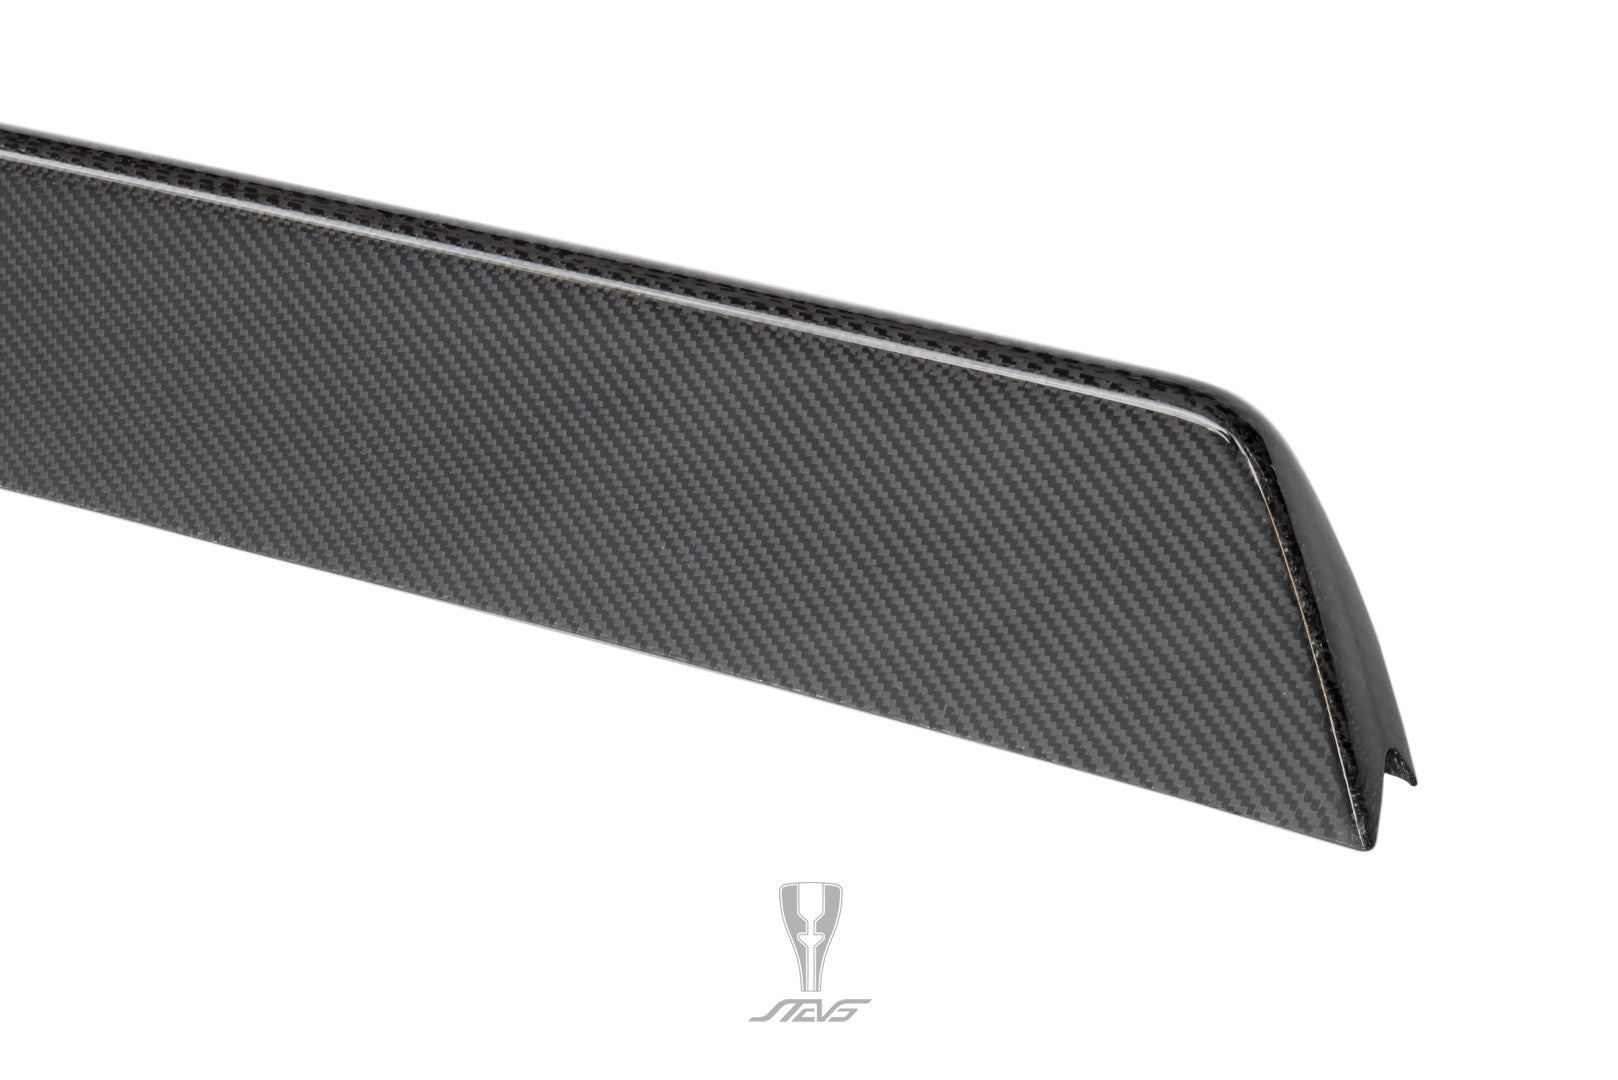 STEVS Crown carbon fiber wing extension, front angle close up view